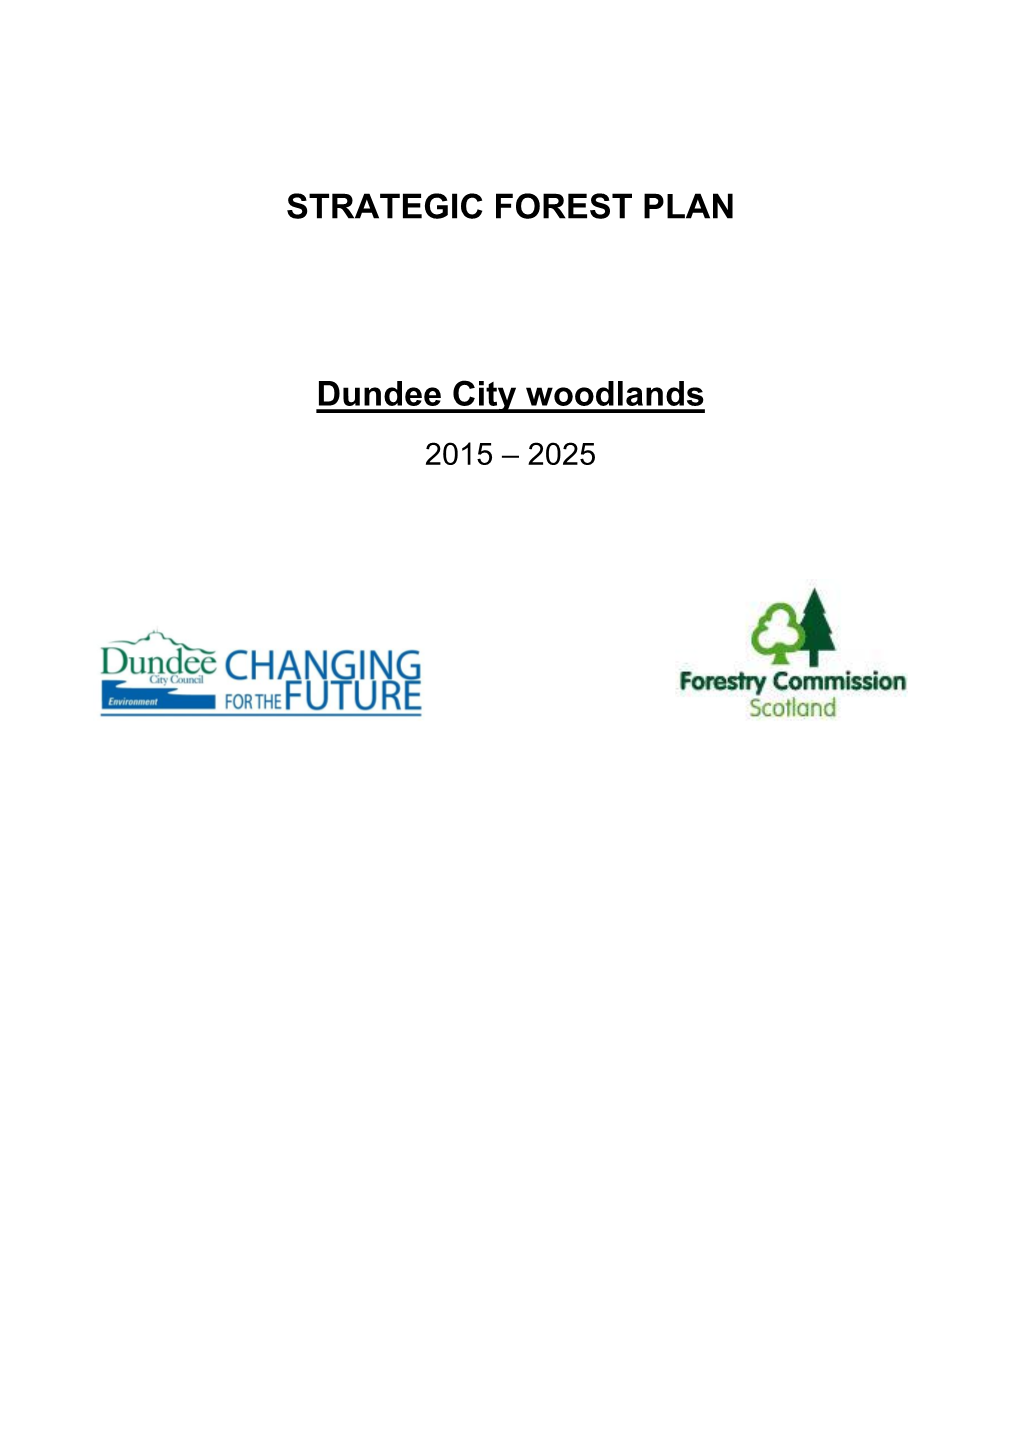 STRATEGIC FOREST PLAN Dundee City Woodlands